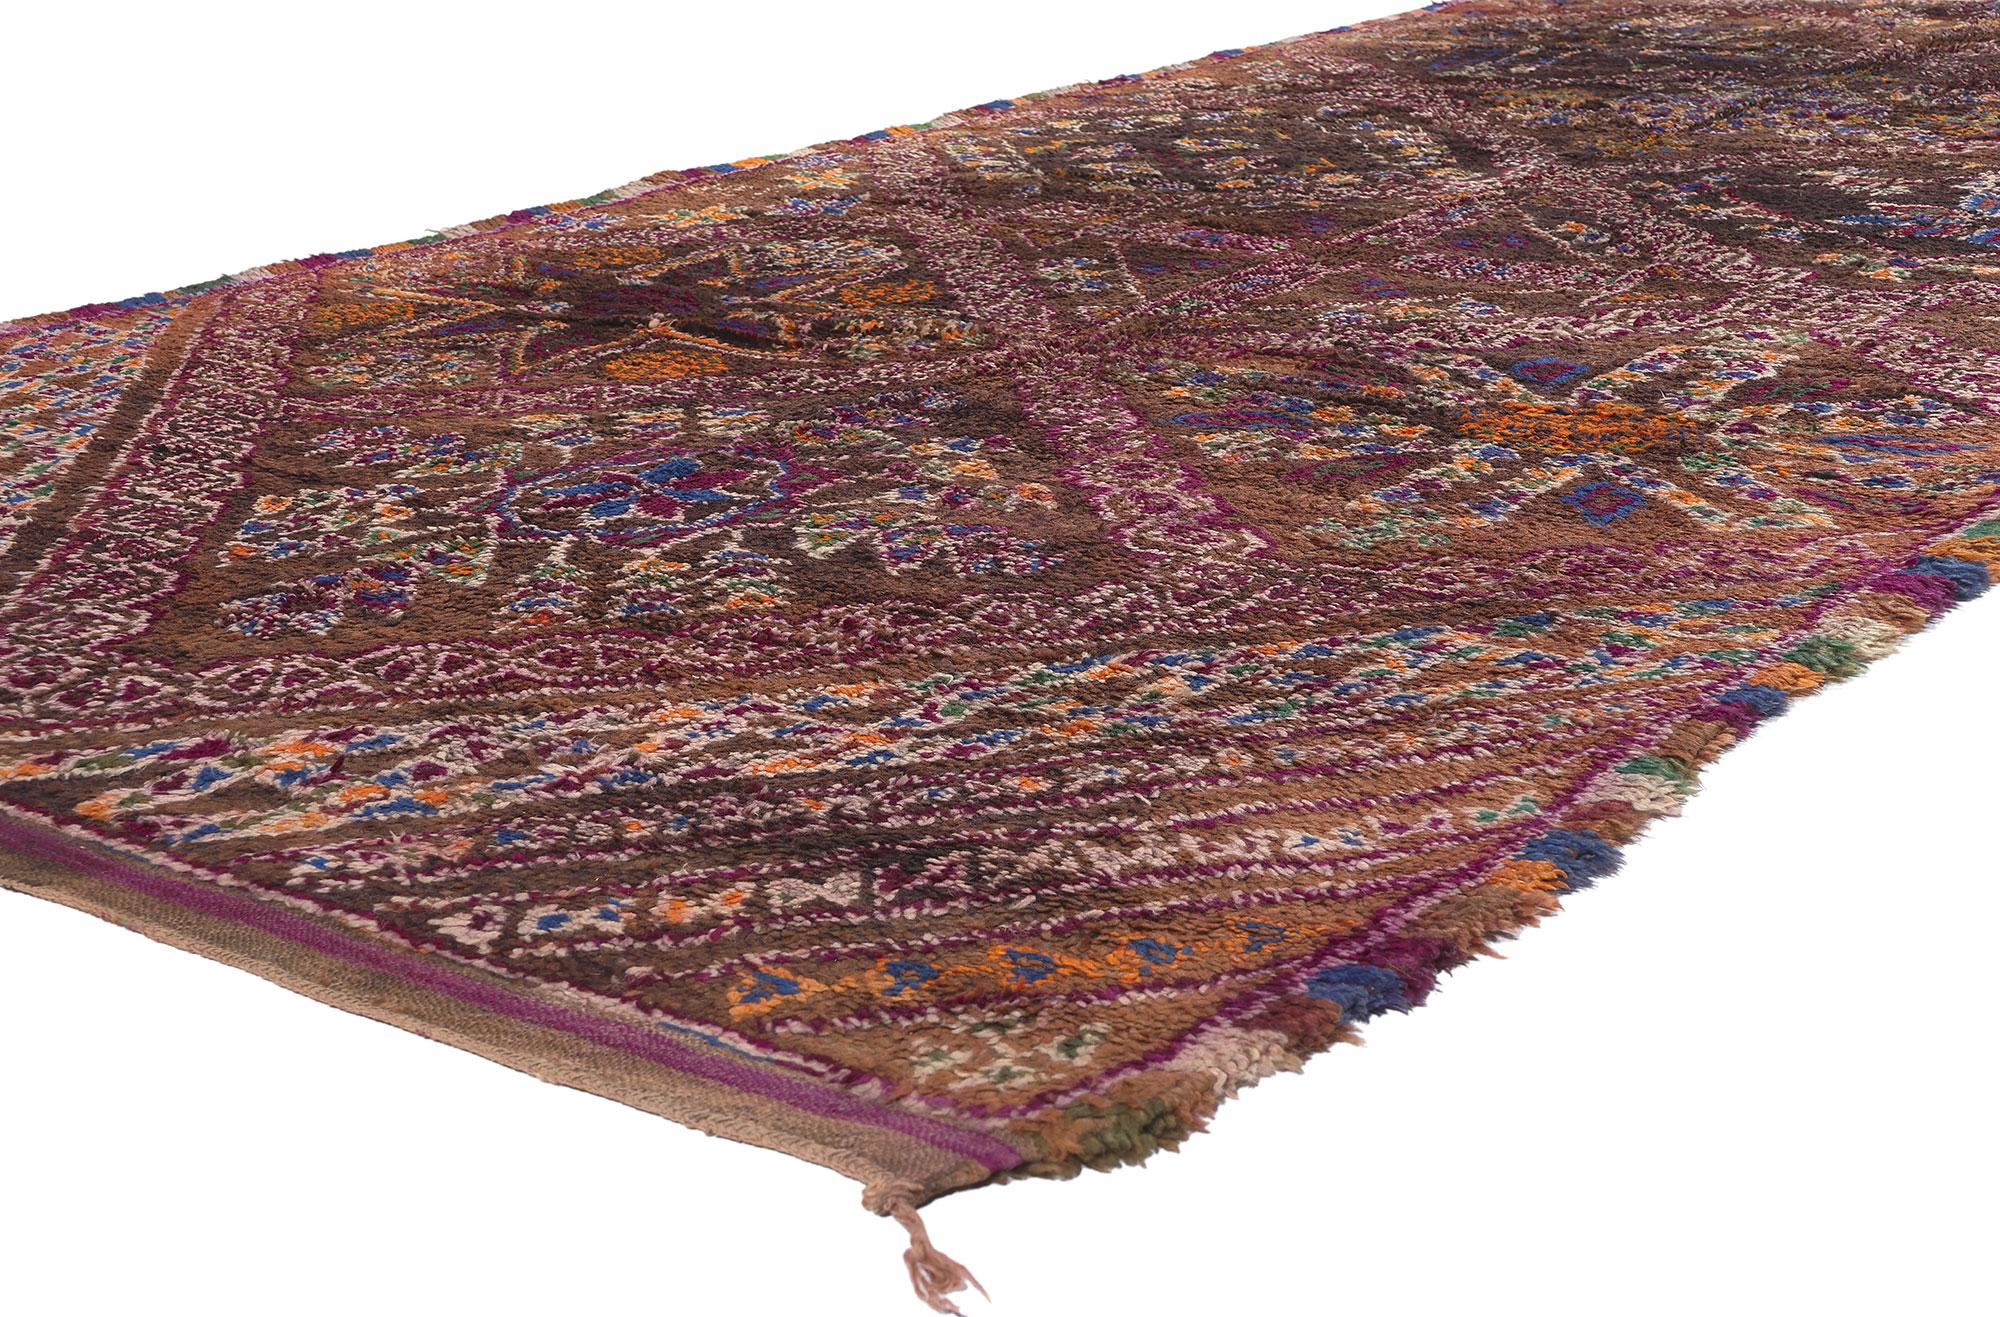 20730 Vintage Brown Beni MGuild Moroccan Rug, 06'00 x 12'05. Embark on a mesmerizing adventure enveloped in the warm embrace of this hand-knotted wool vintage Beni Mguild Moroccan rug—an enchanting Berber carpet that seamlessly blends nomadic charm